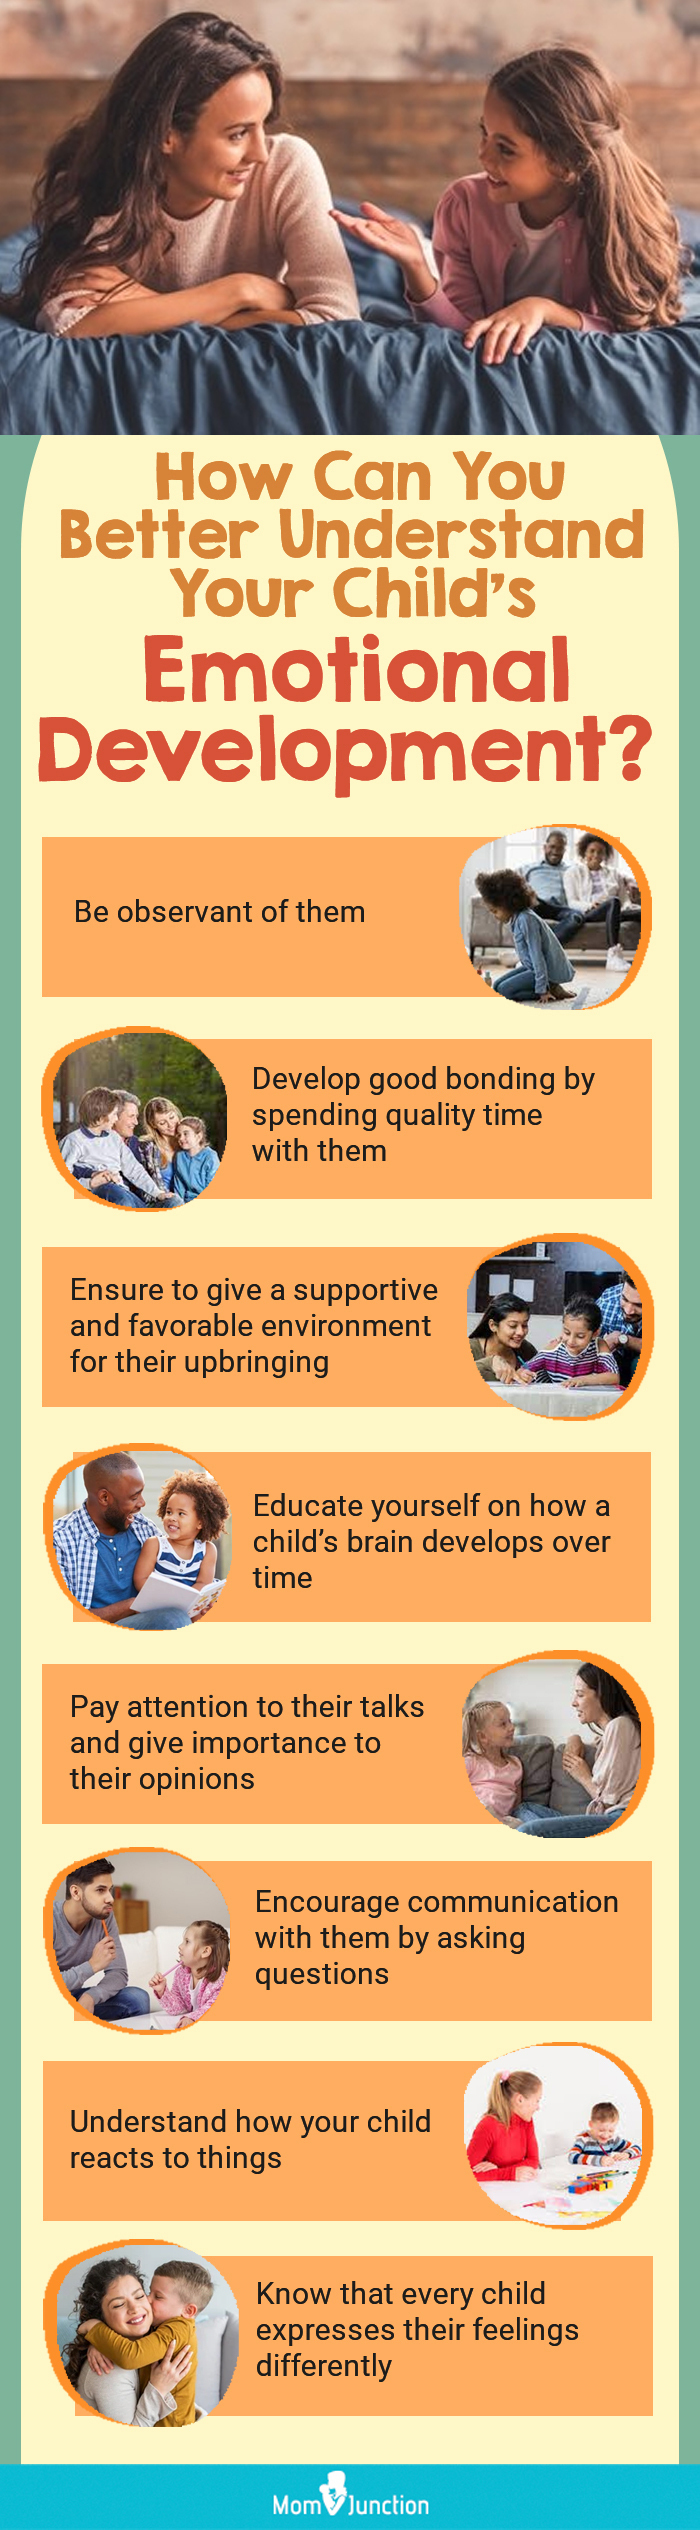 how can you better understand your childs emotional development (infographic)